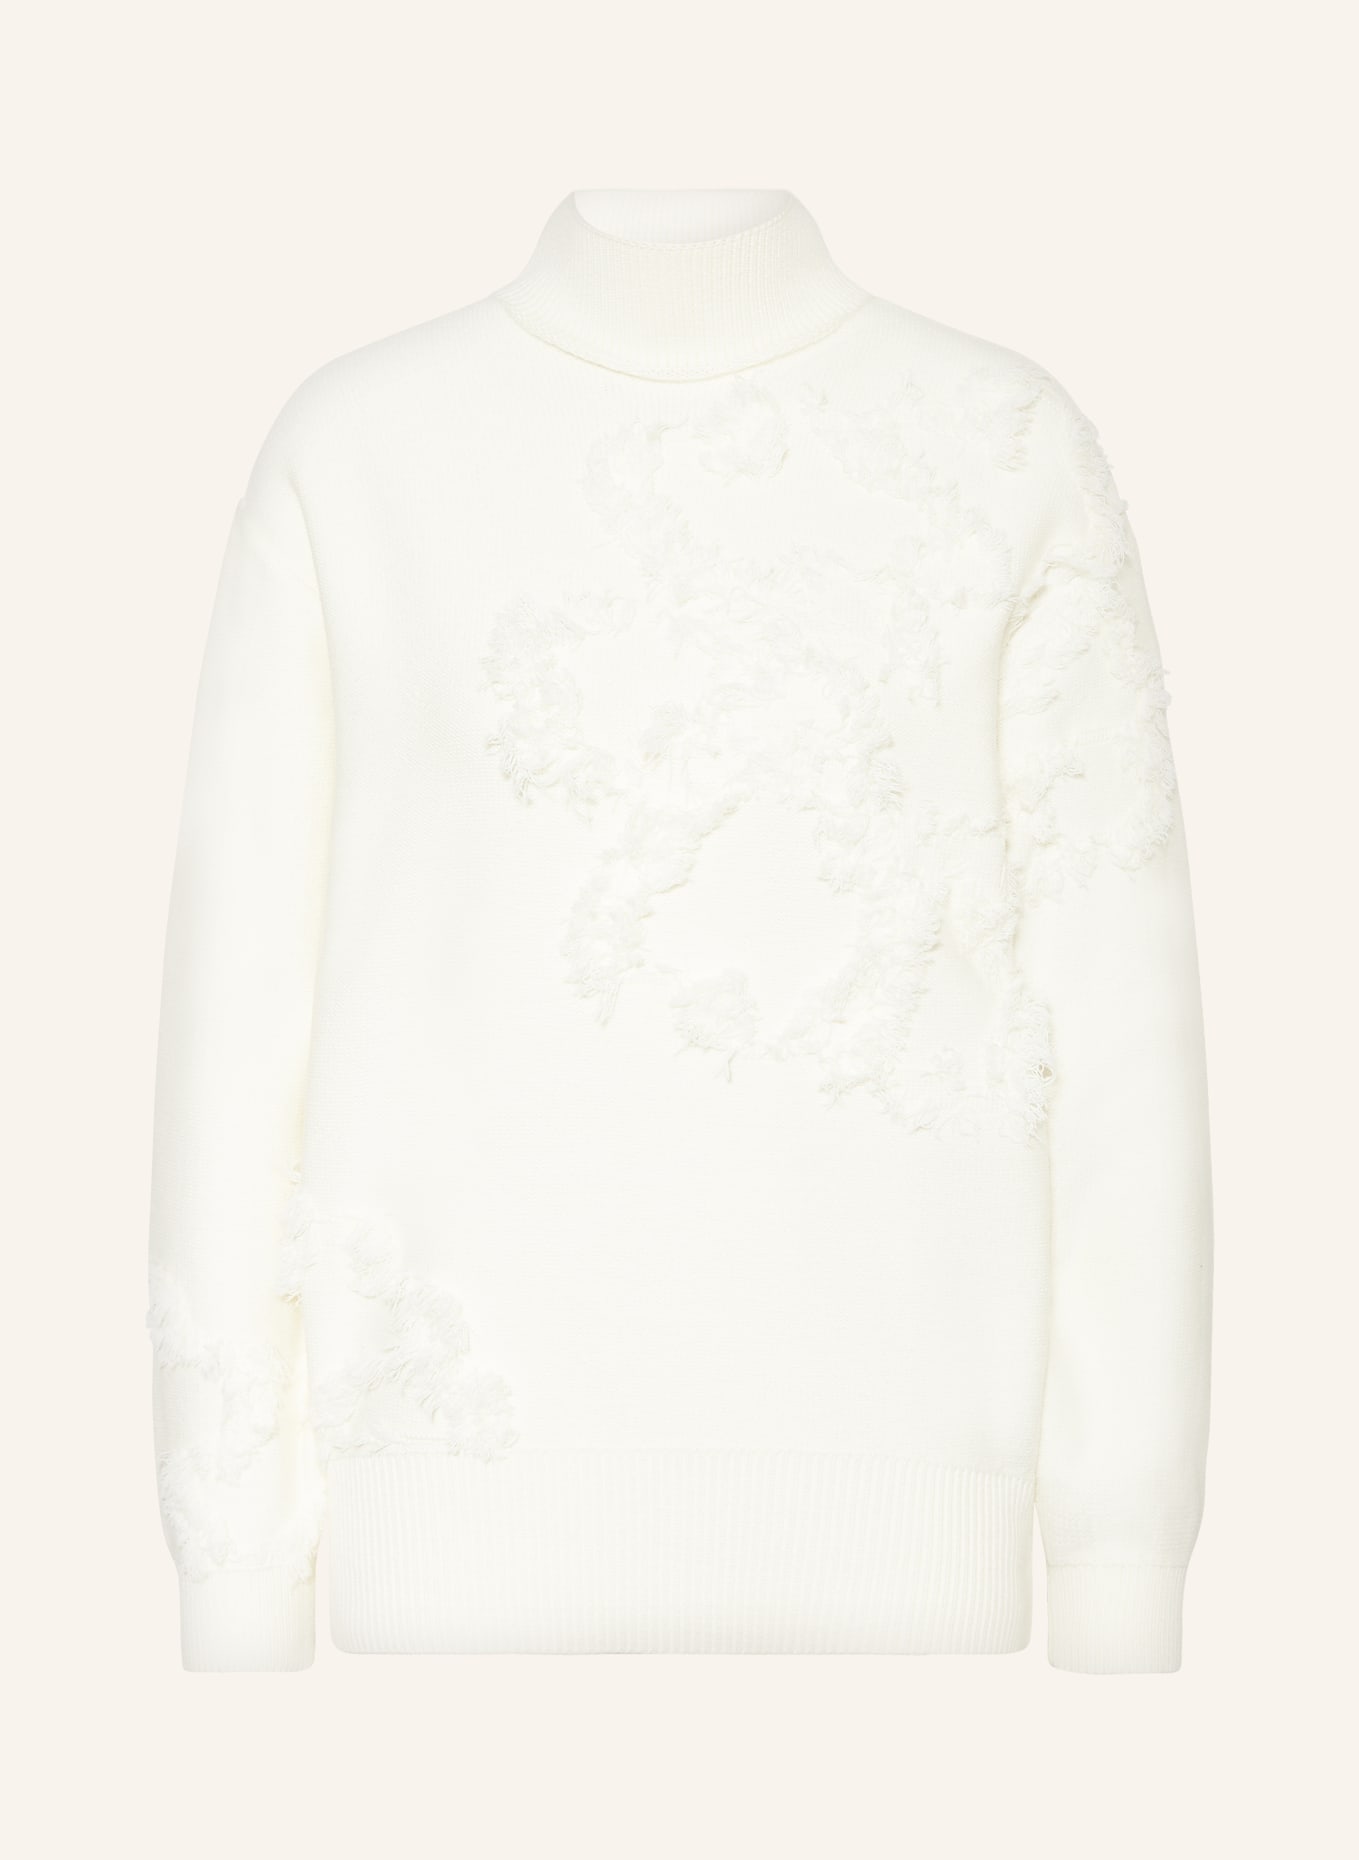 TED BAKER Pullover CHALAYY, Farbe: CREME (Bild 1)